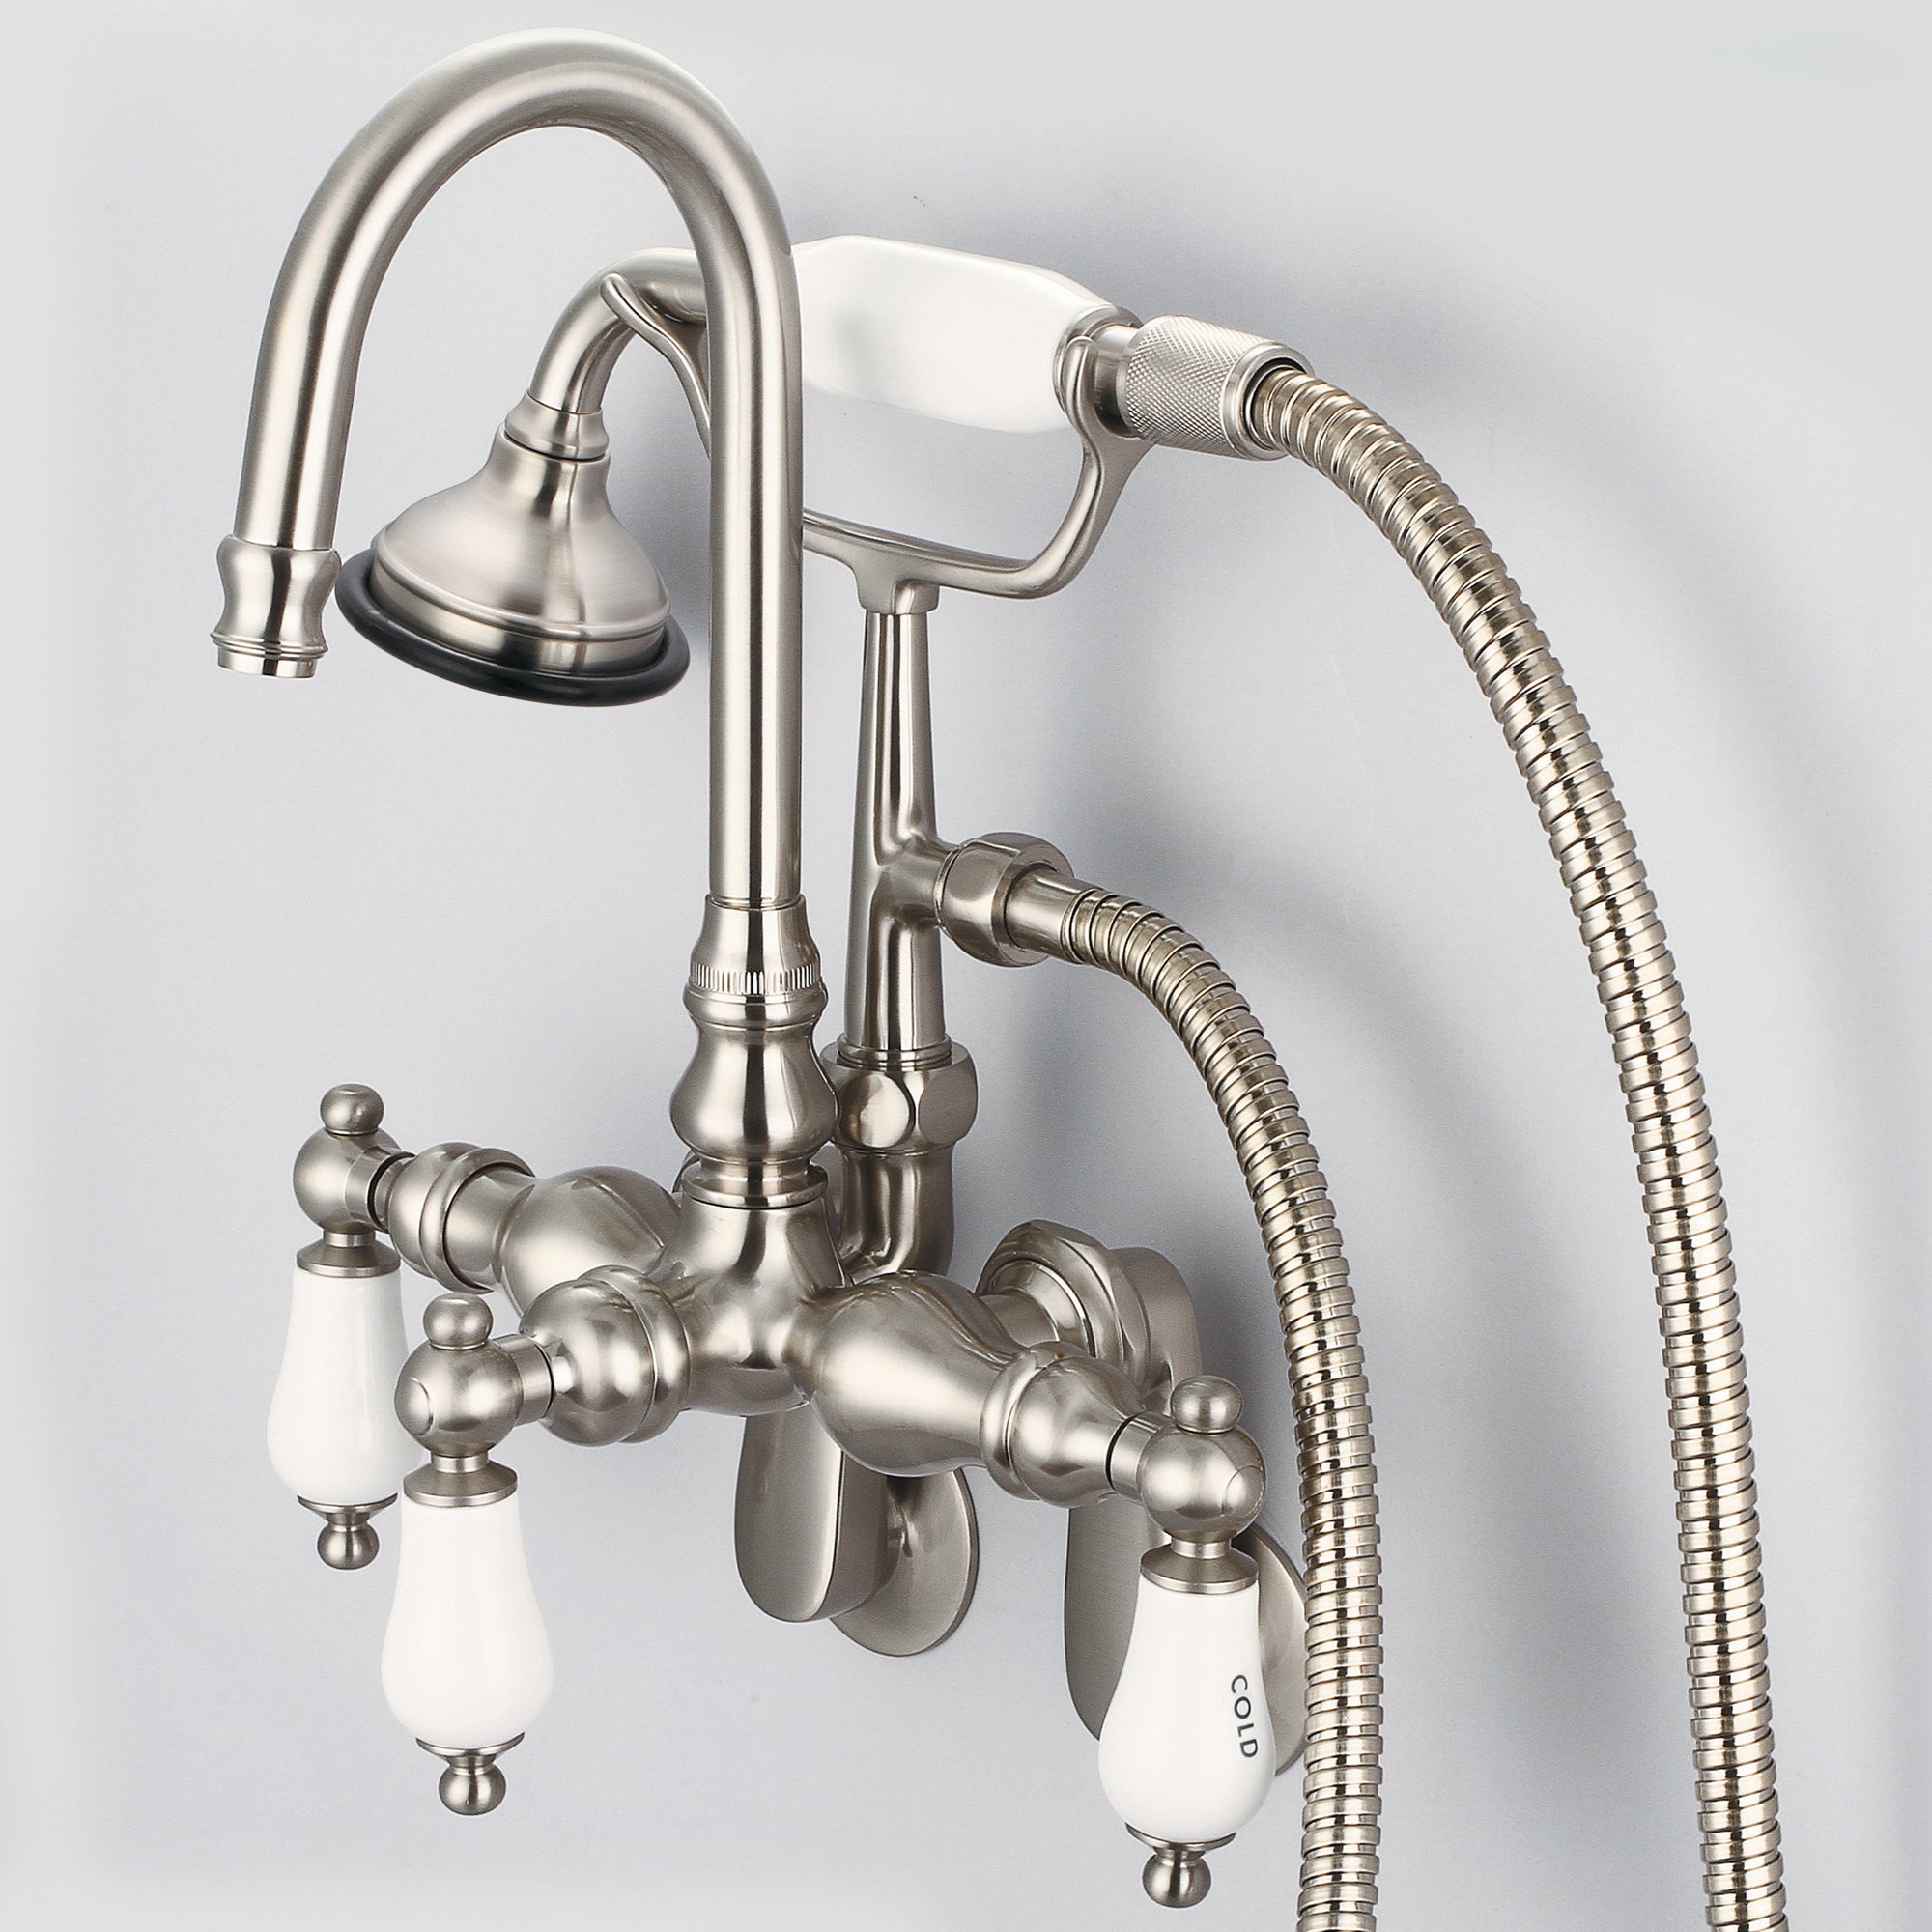 Water Creation | Vintage Classic Adjustable Spread Wall Mount Tub Faucet With Gooseneck Spout, Swivel Wall Connector & Handheld Shower in Brushed Nickel Finish With Porcelain Lever Handles, Hot And Cold Labels Included | F6-0011-02-CL